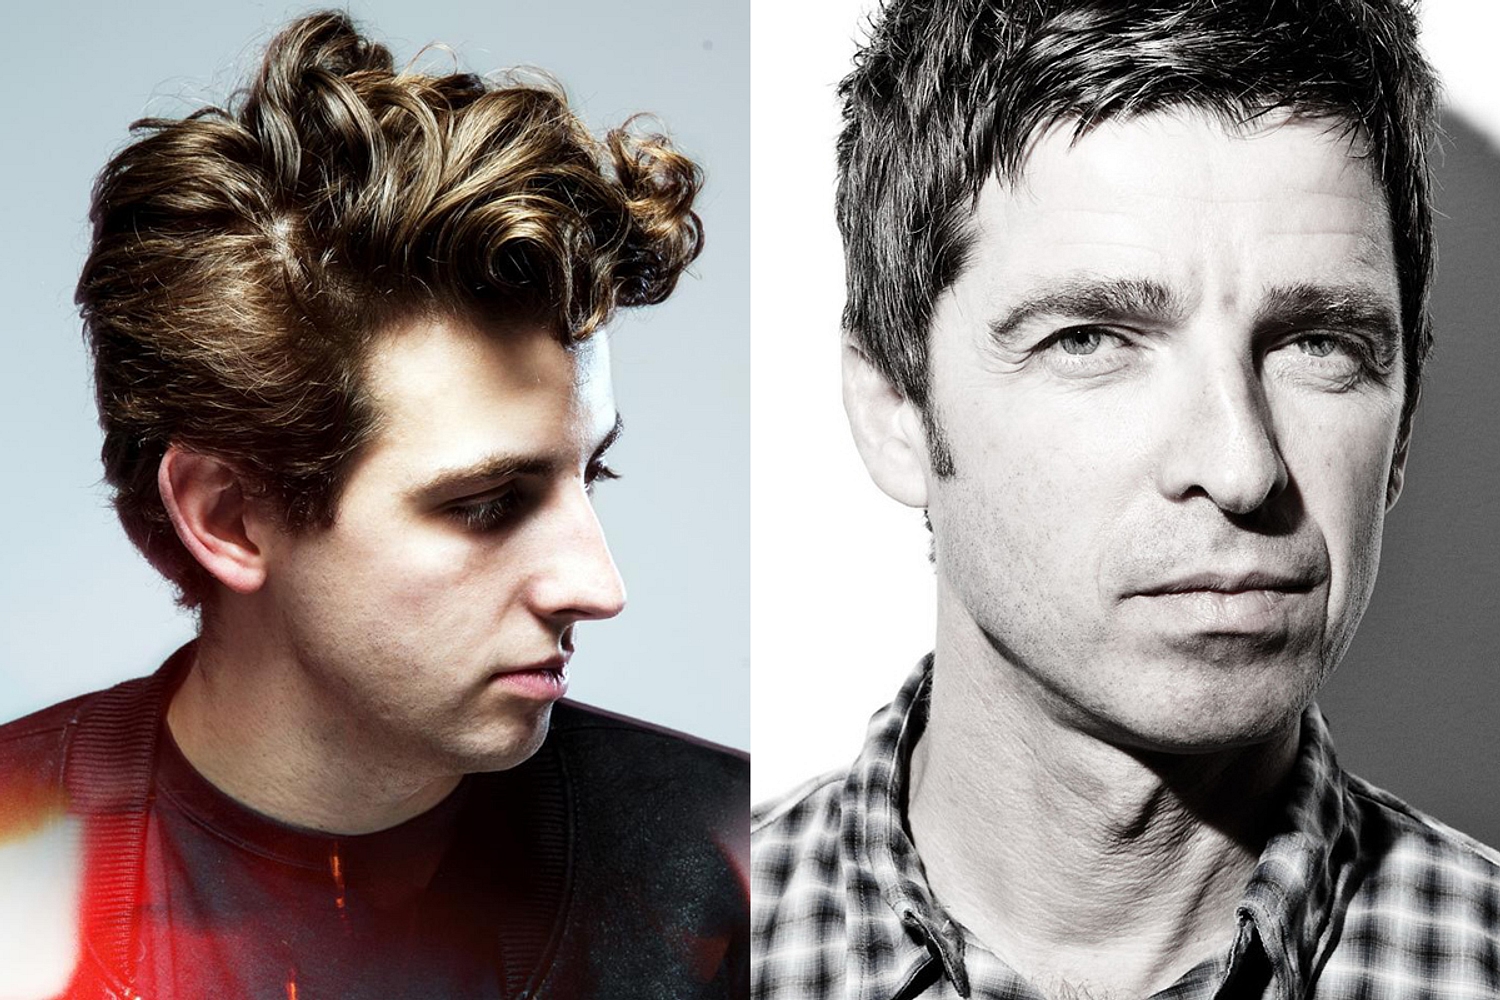 Is Noel Gallagher working with Jamie xx?